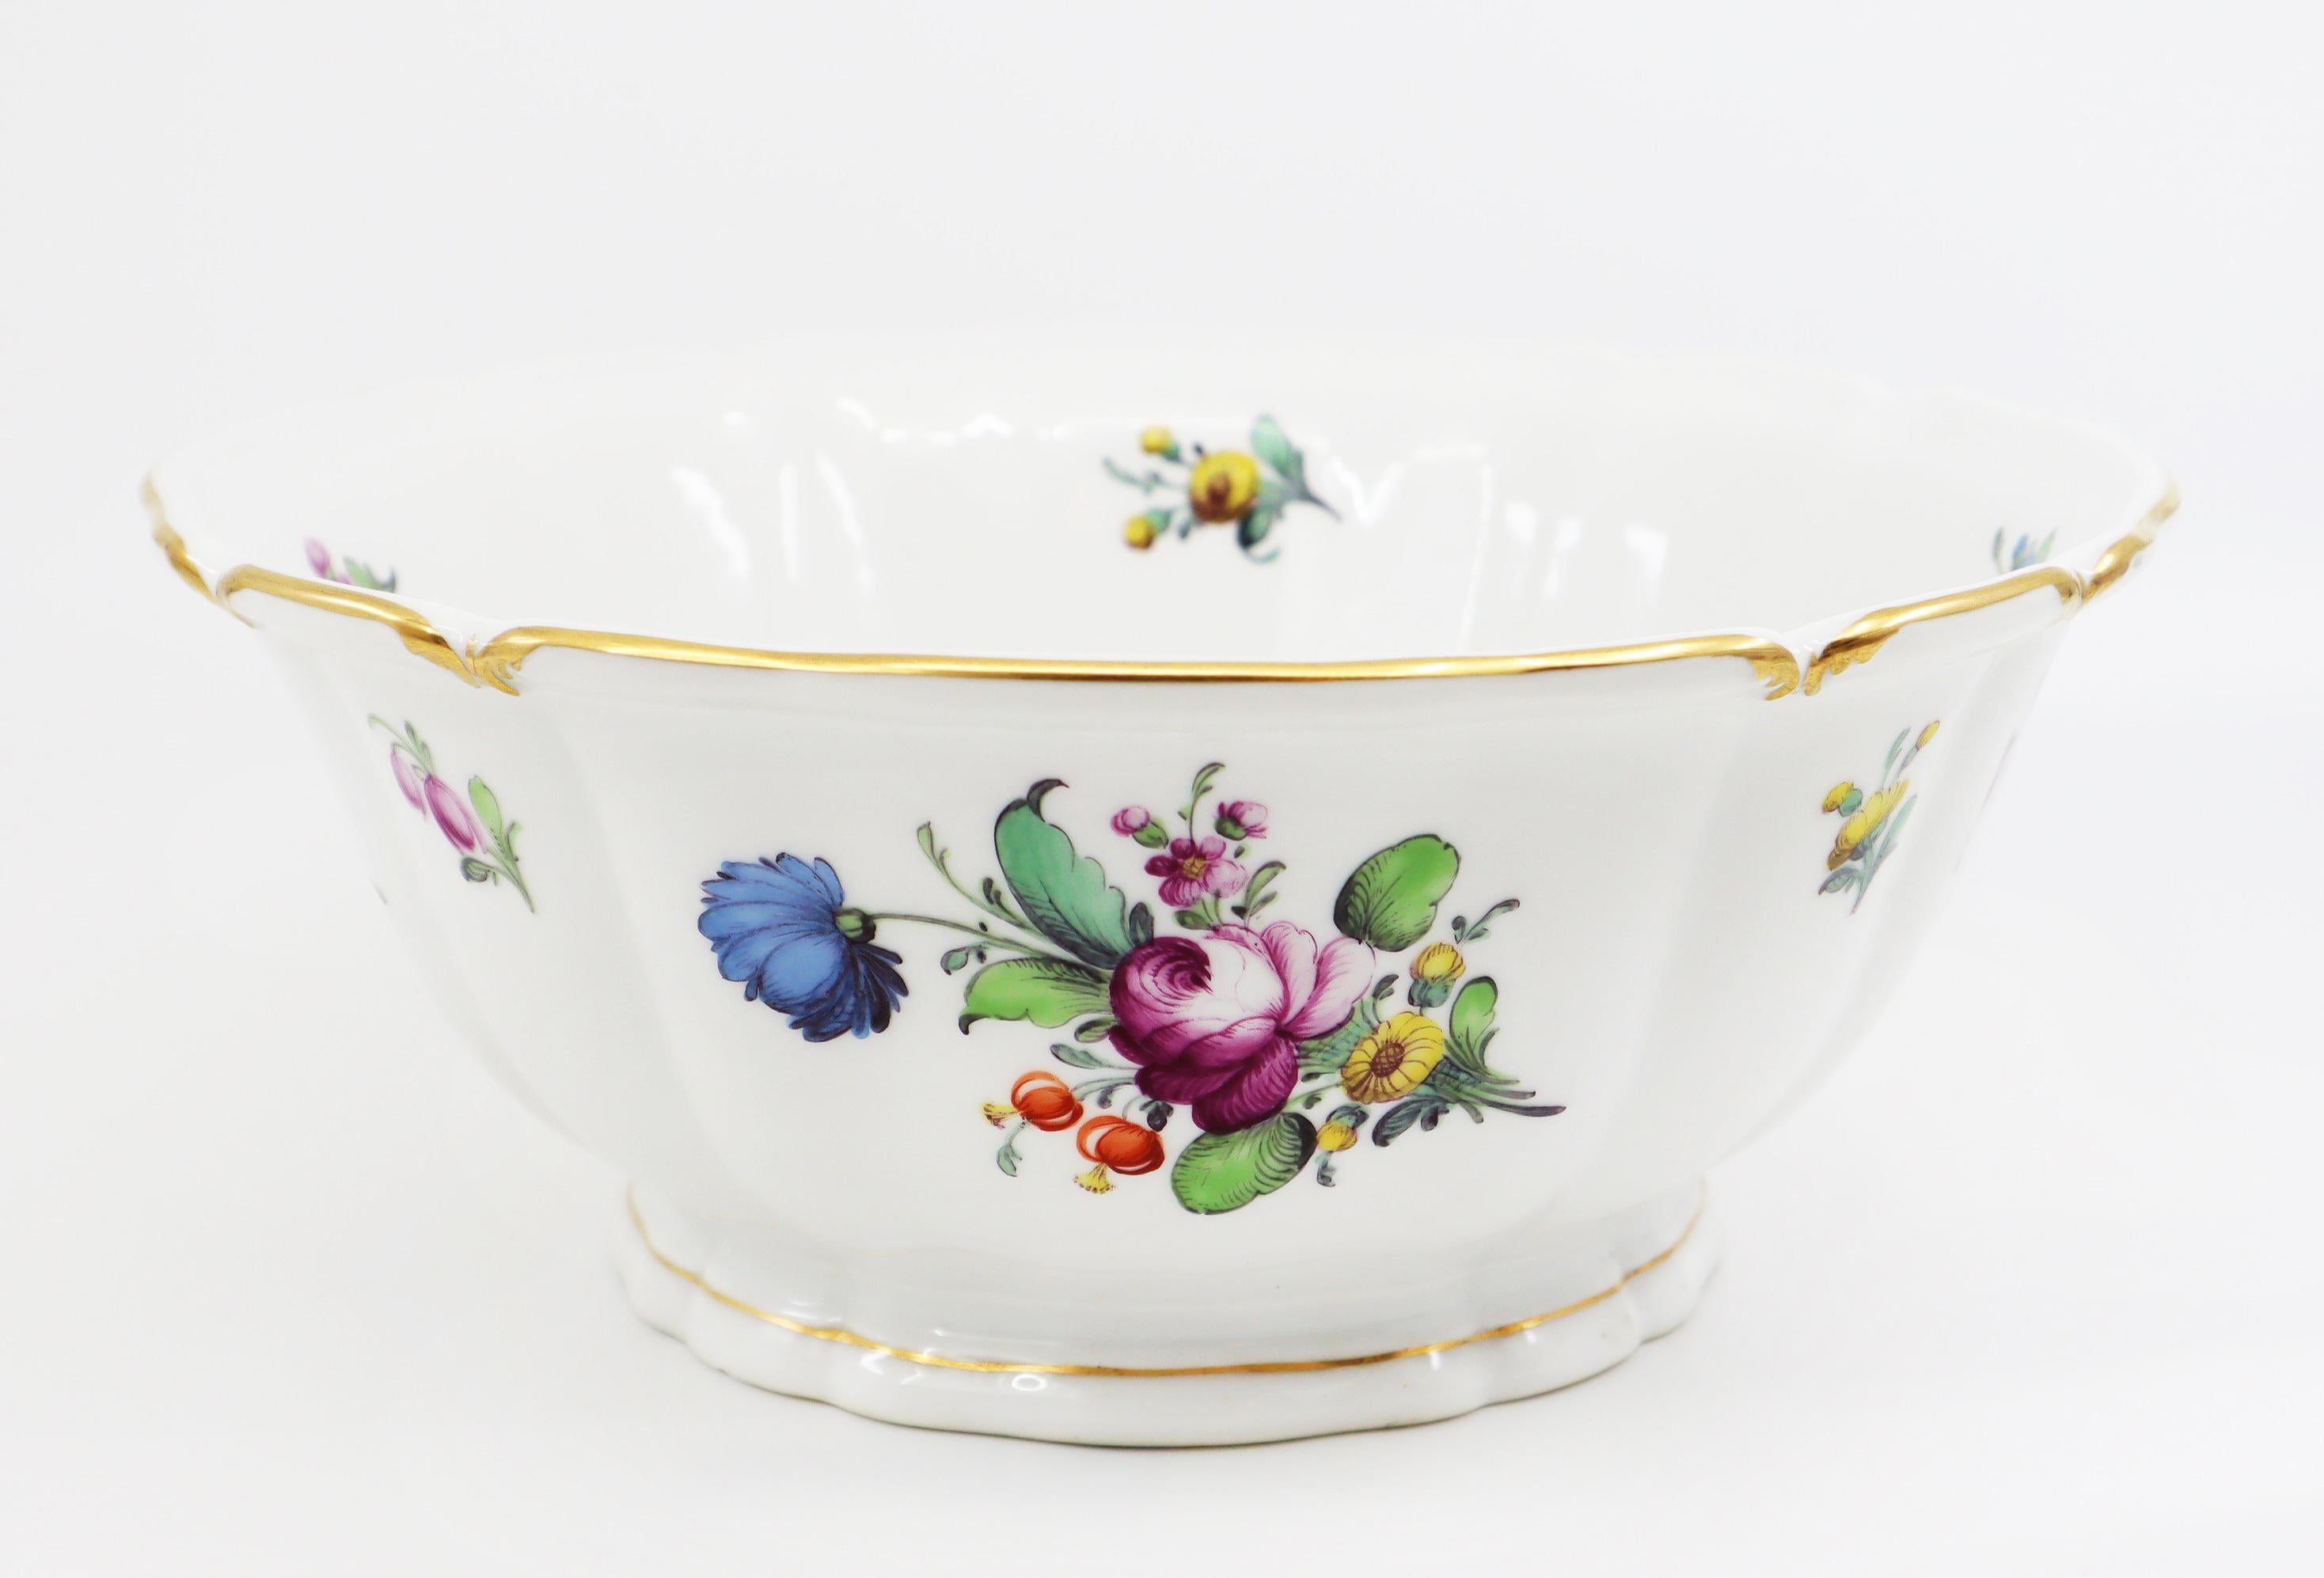 Dinner Service, 19th Century Porcelain, German, Hand Painted with Flowers Décor 3